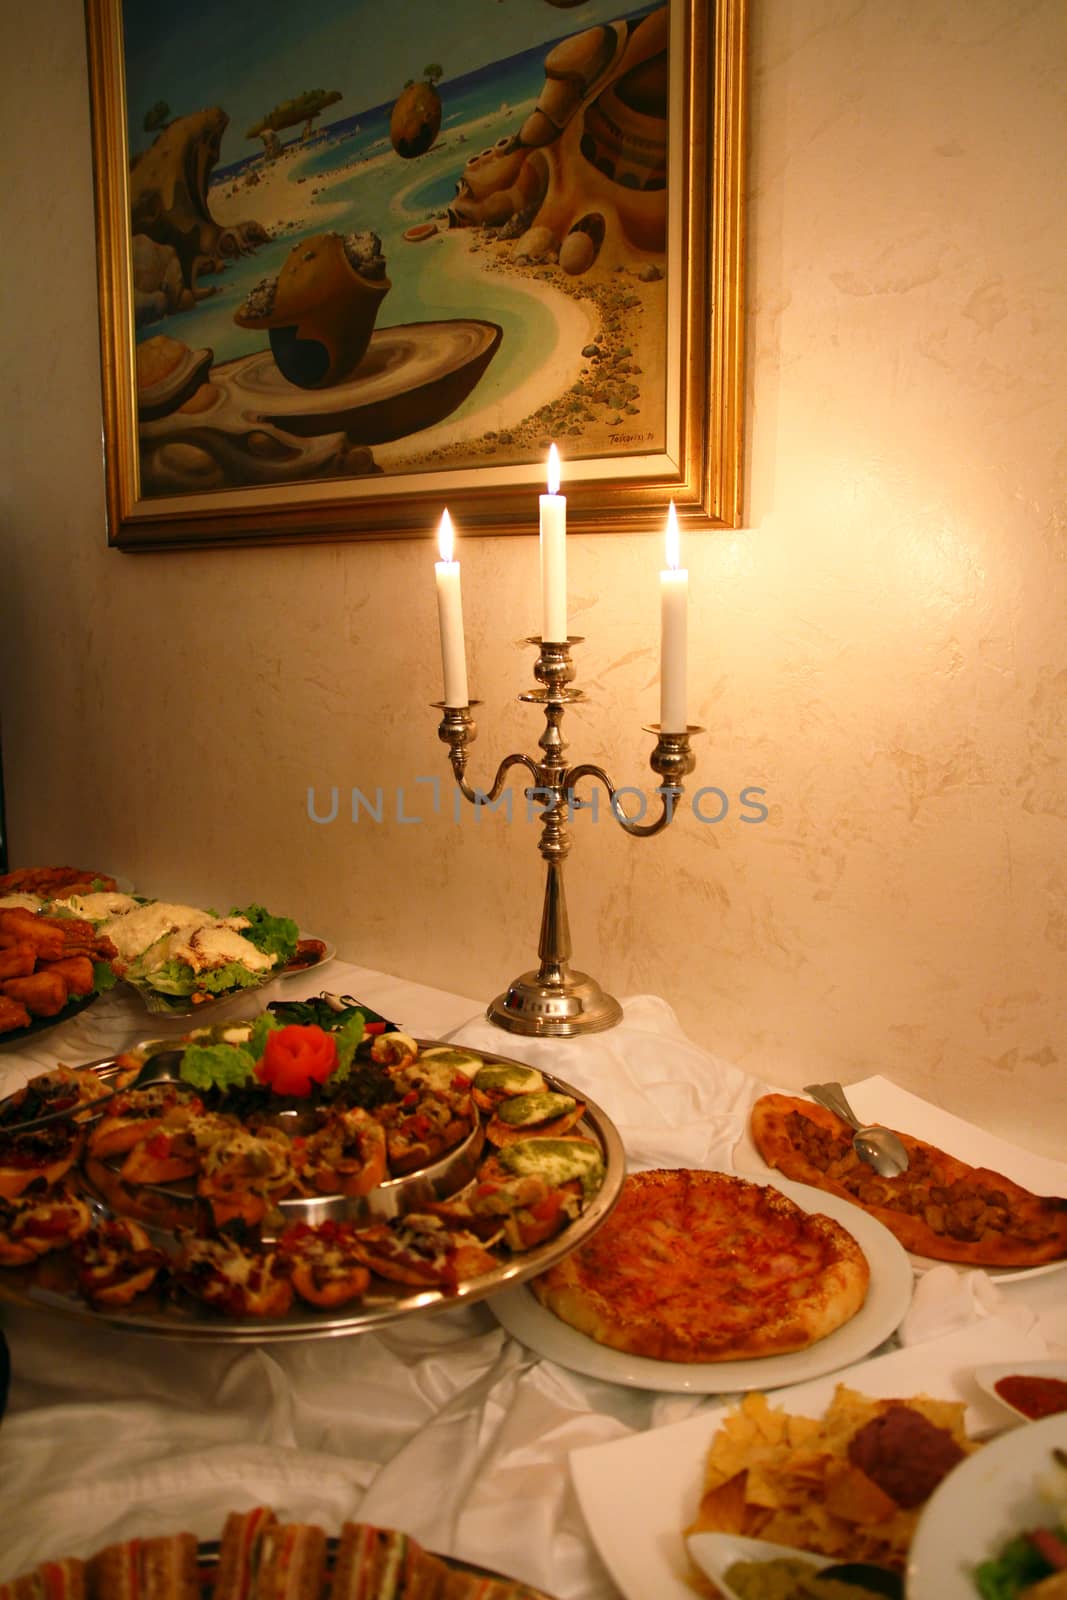 candlestick and table with food, retro stile